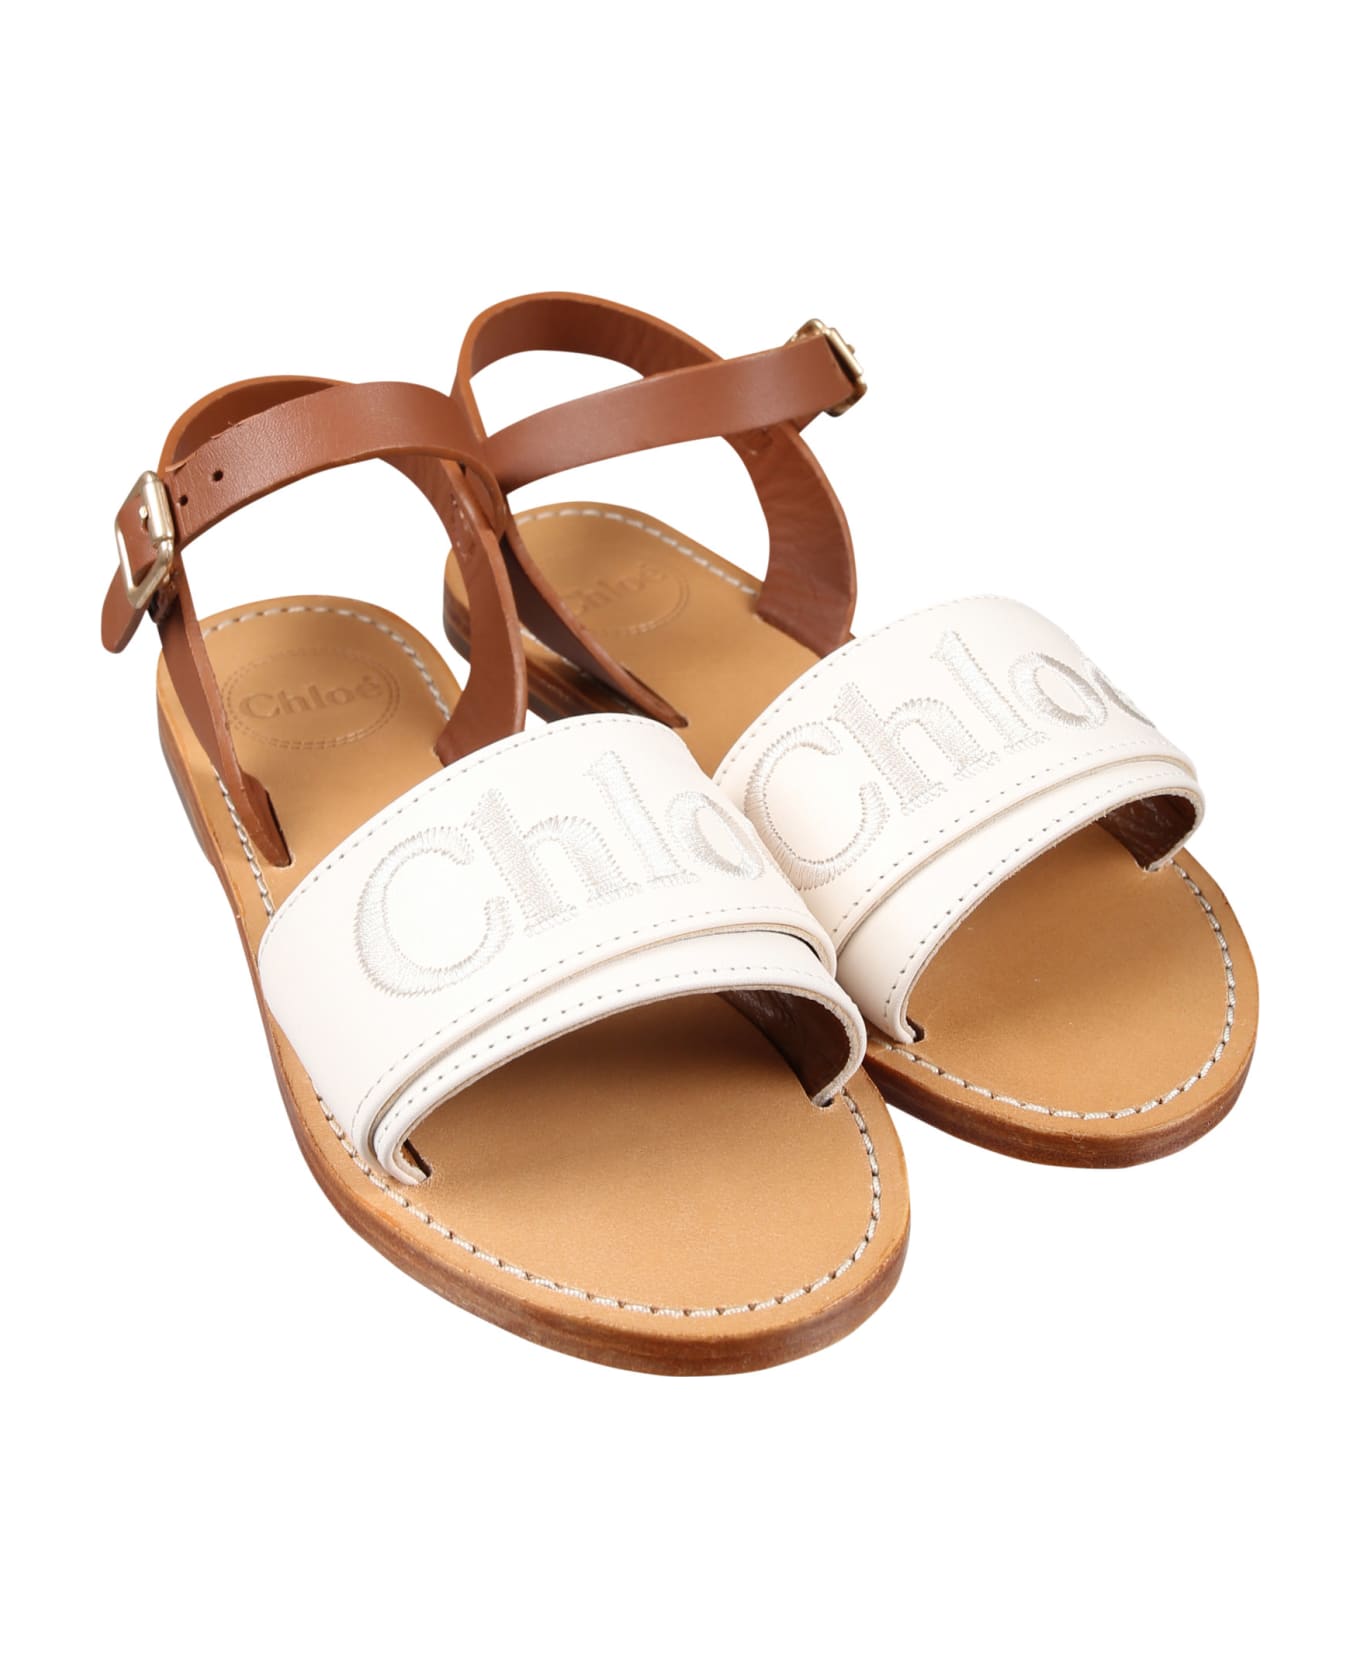 Chloé Ivory Sandals For Girl With Logo - Ivory